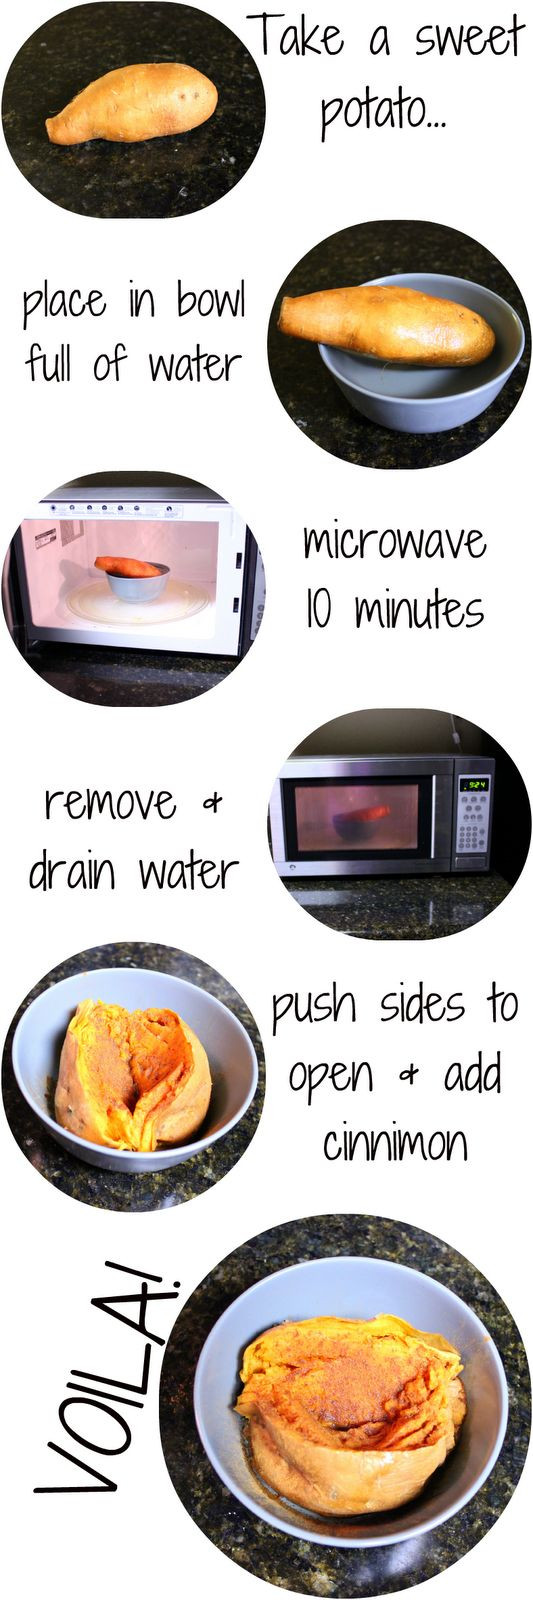 How To Cook Sweet Potato In Microwave
 Best 25 Sweet potato in microwave ideas on Pinterest